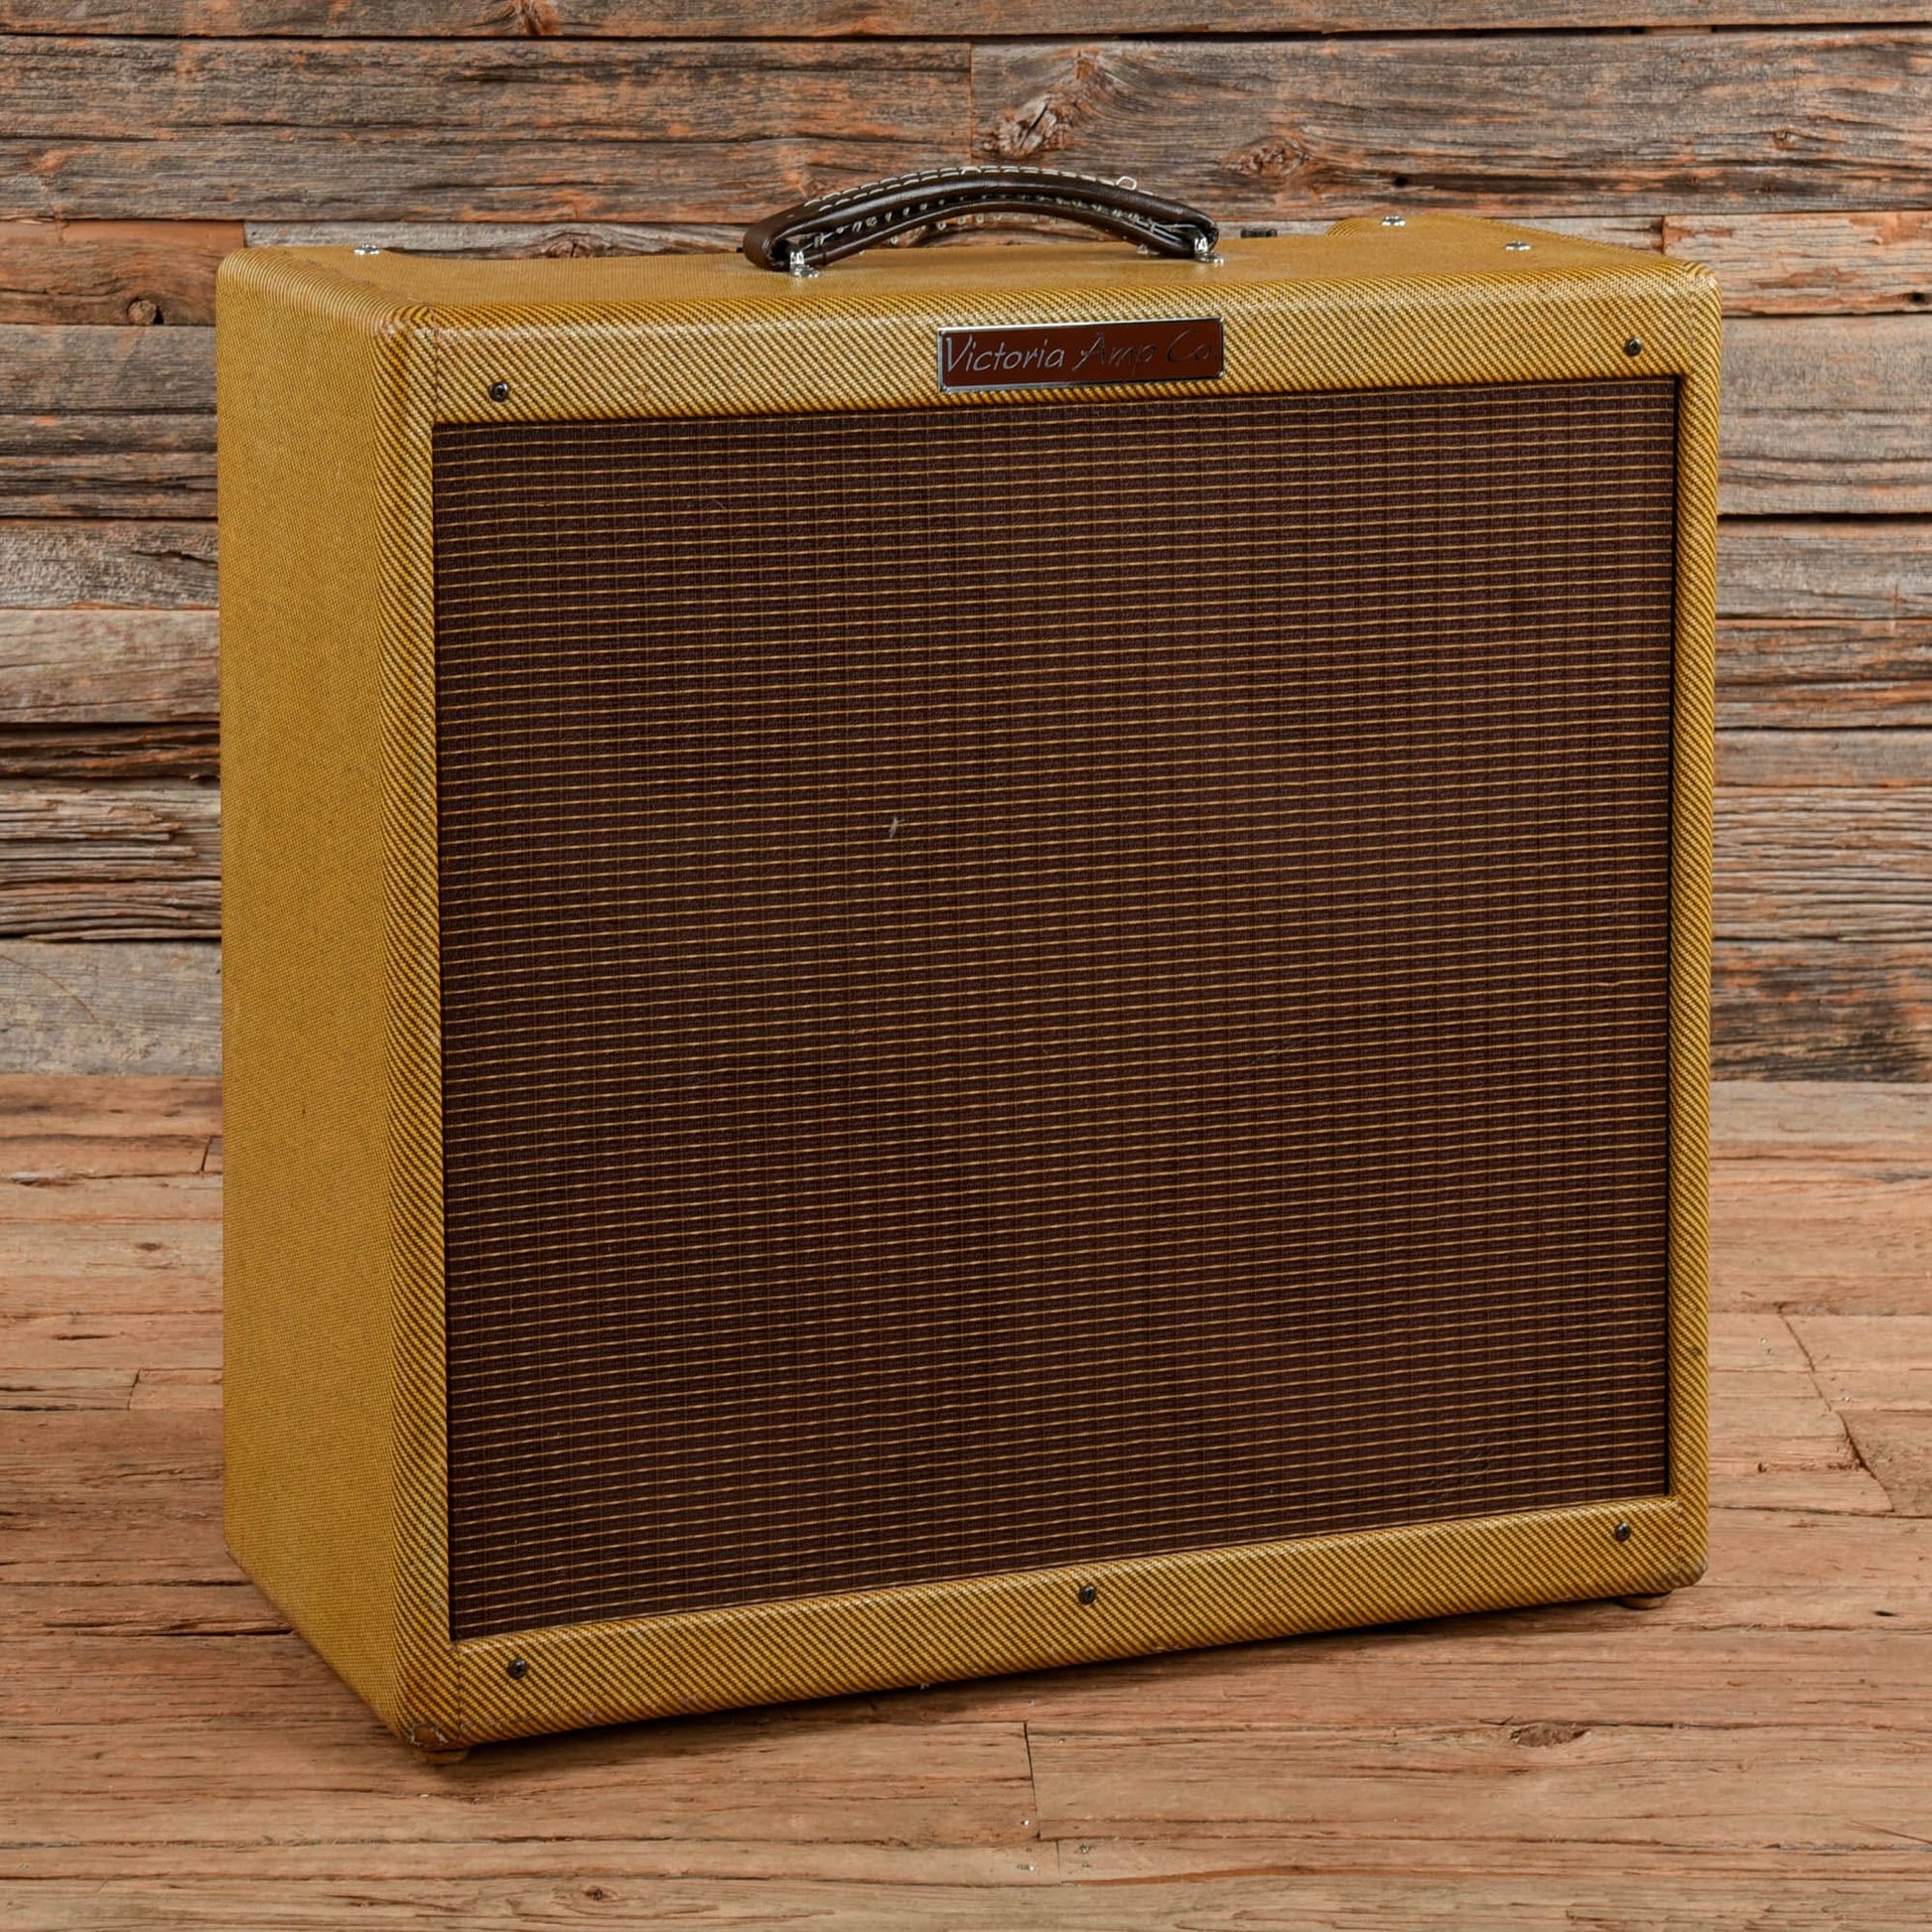 Victoria 45410 Combo Amps / Guitar Cabinets